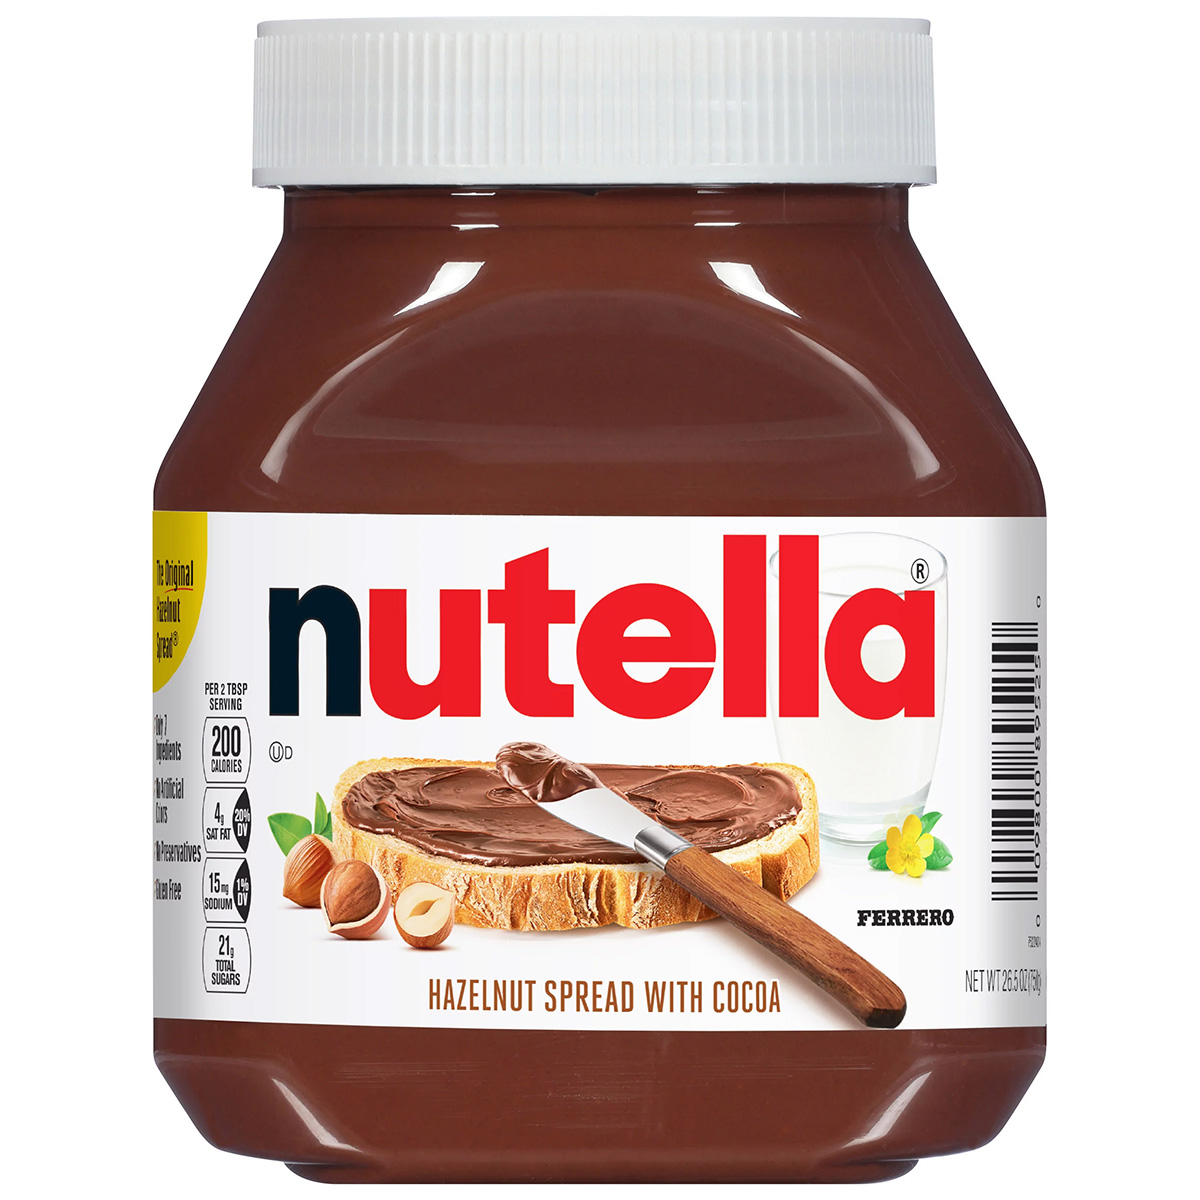 Nutella was not part of Ferrero's Kinder recall nor were salmonella or maggots or worms found in the hazelnut spread.